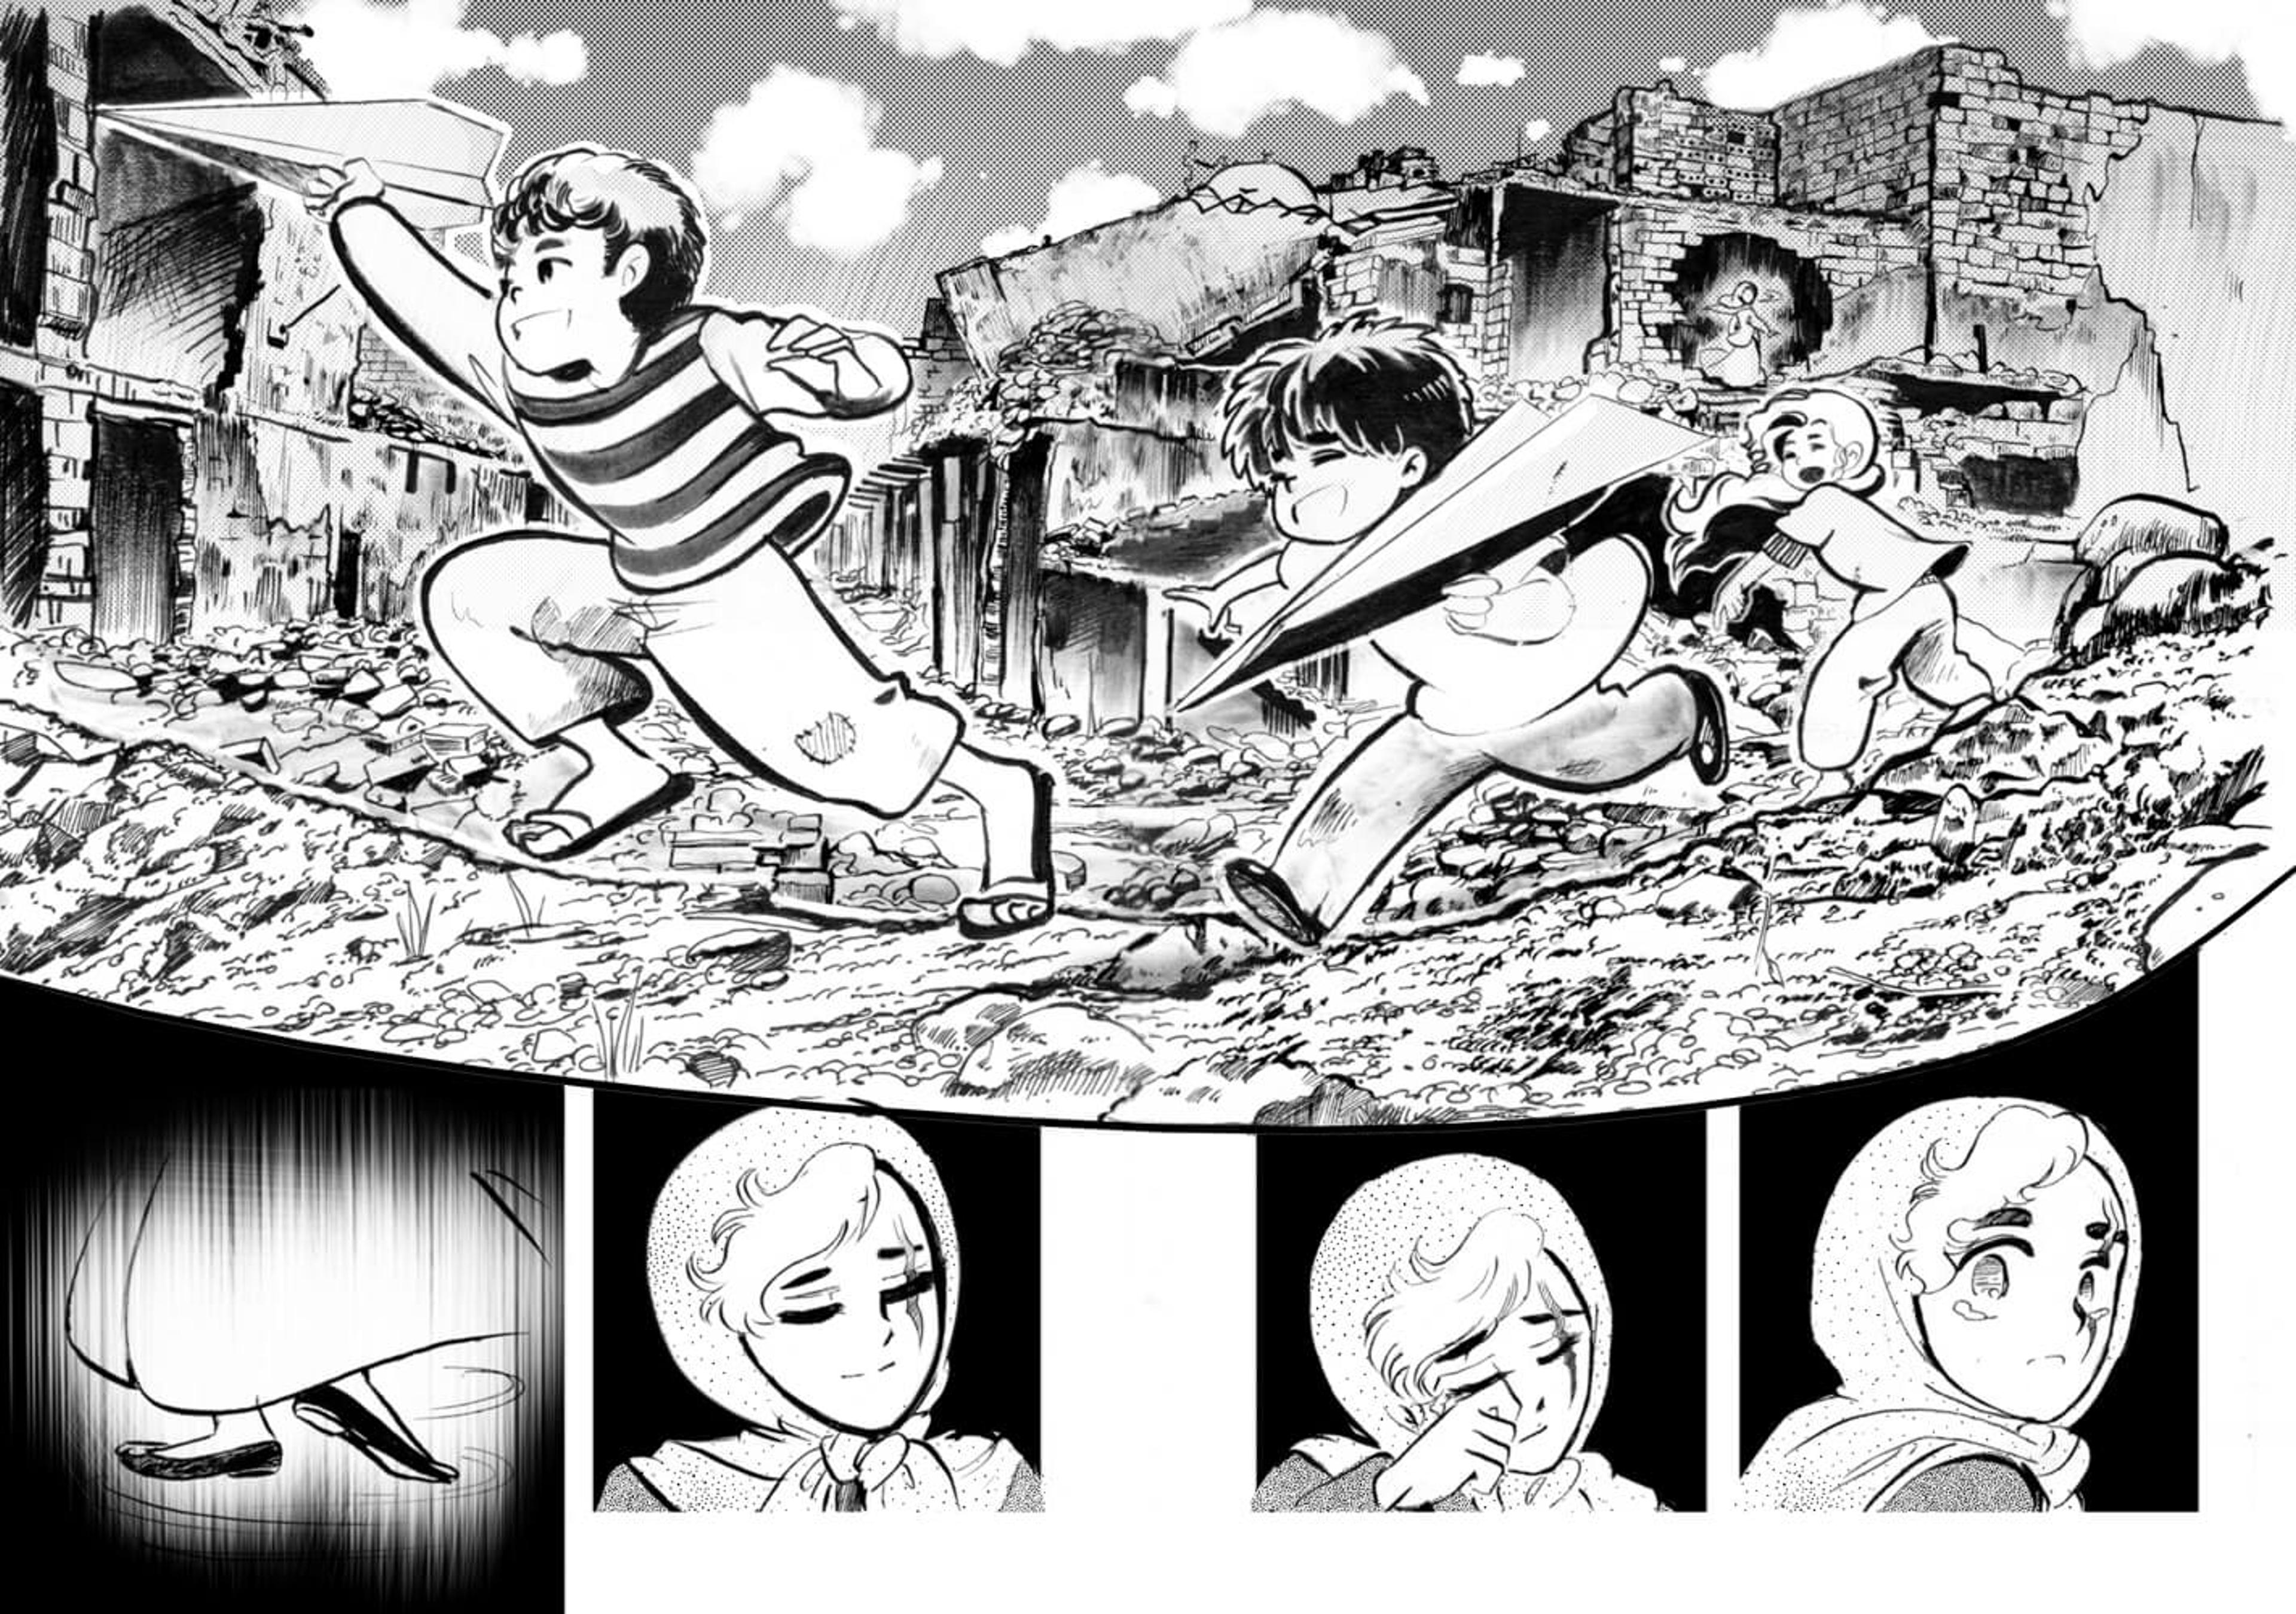 Illustration of three children playing with paper aeroplanes in rubble, beneath a sequence of images of a woman crying 